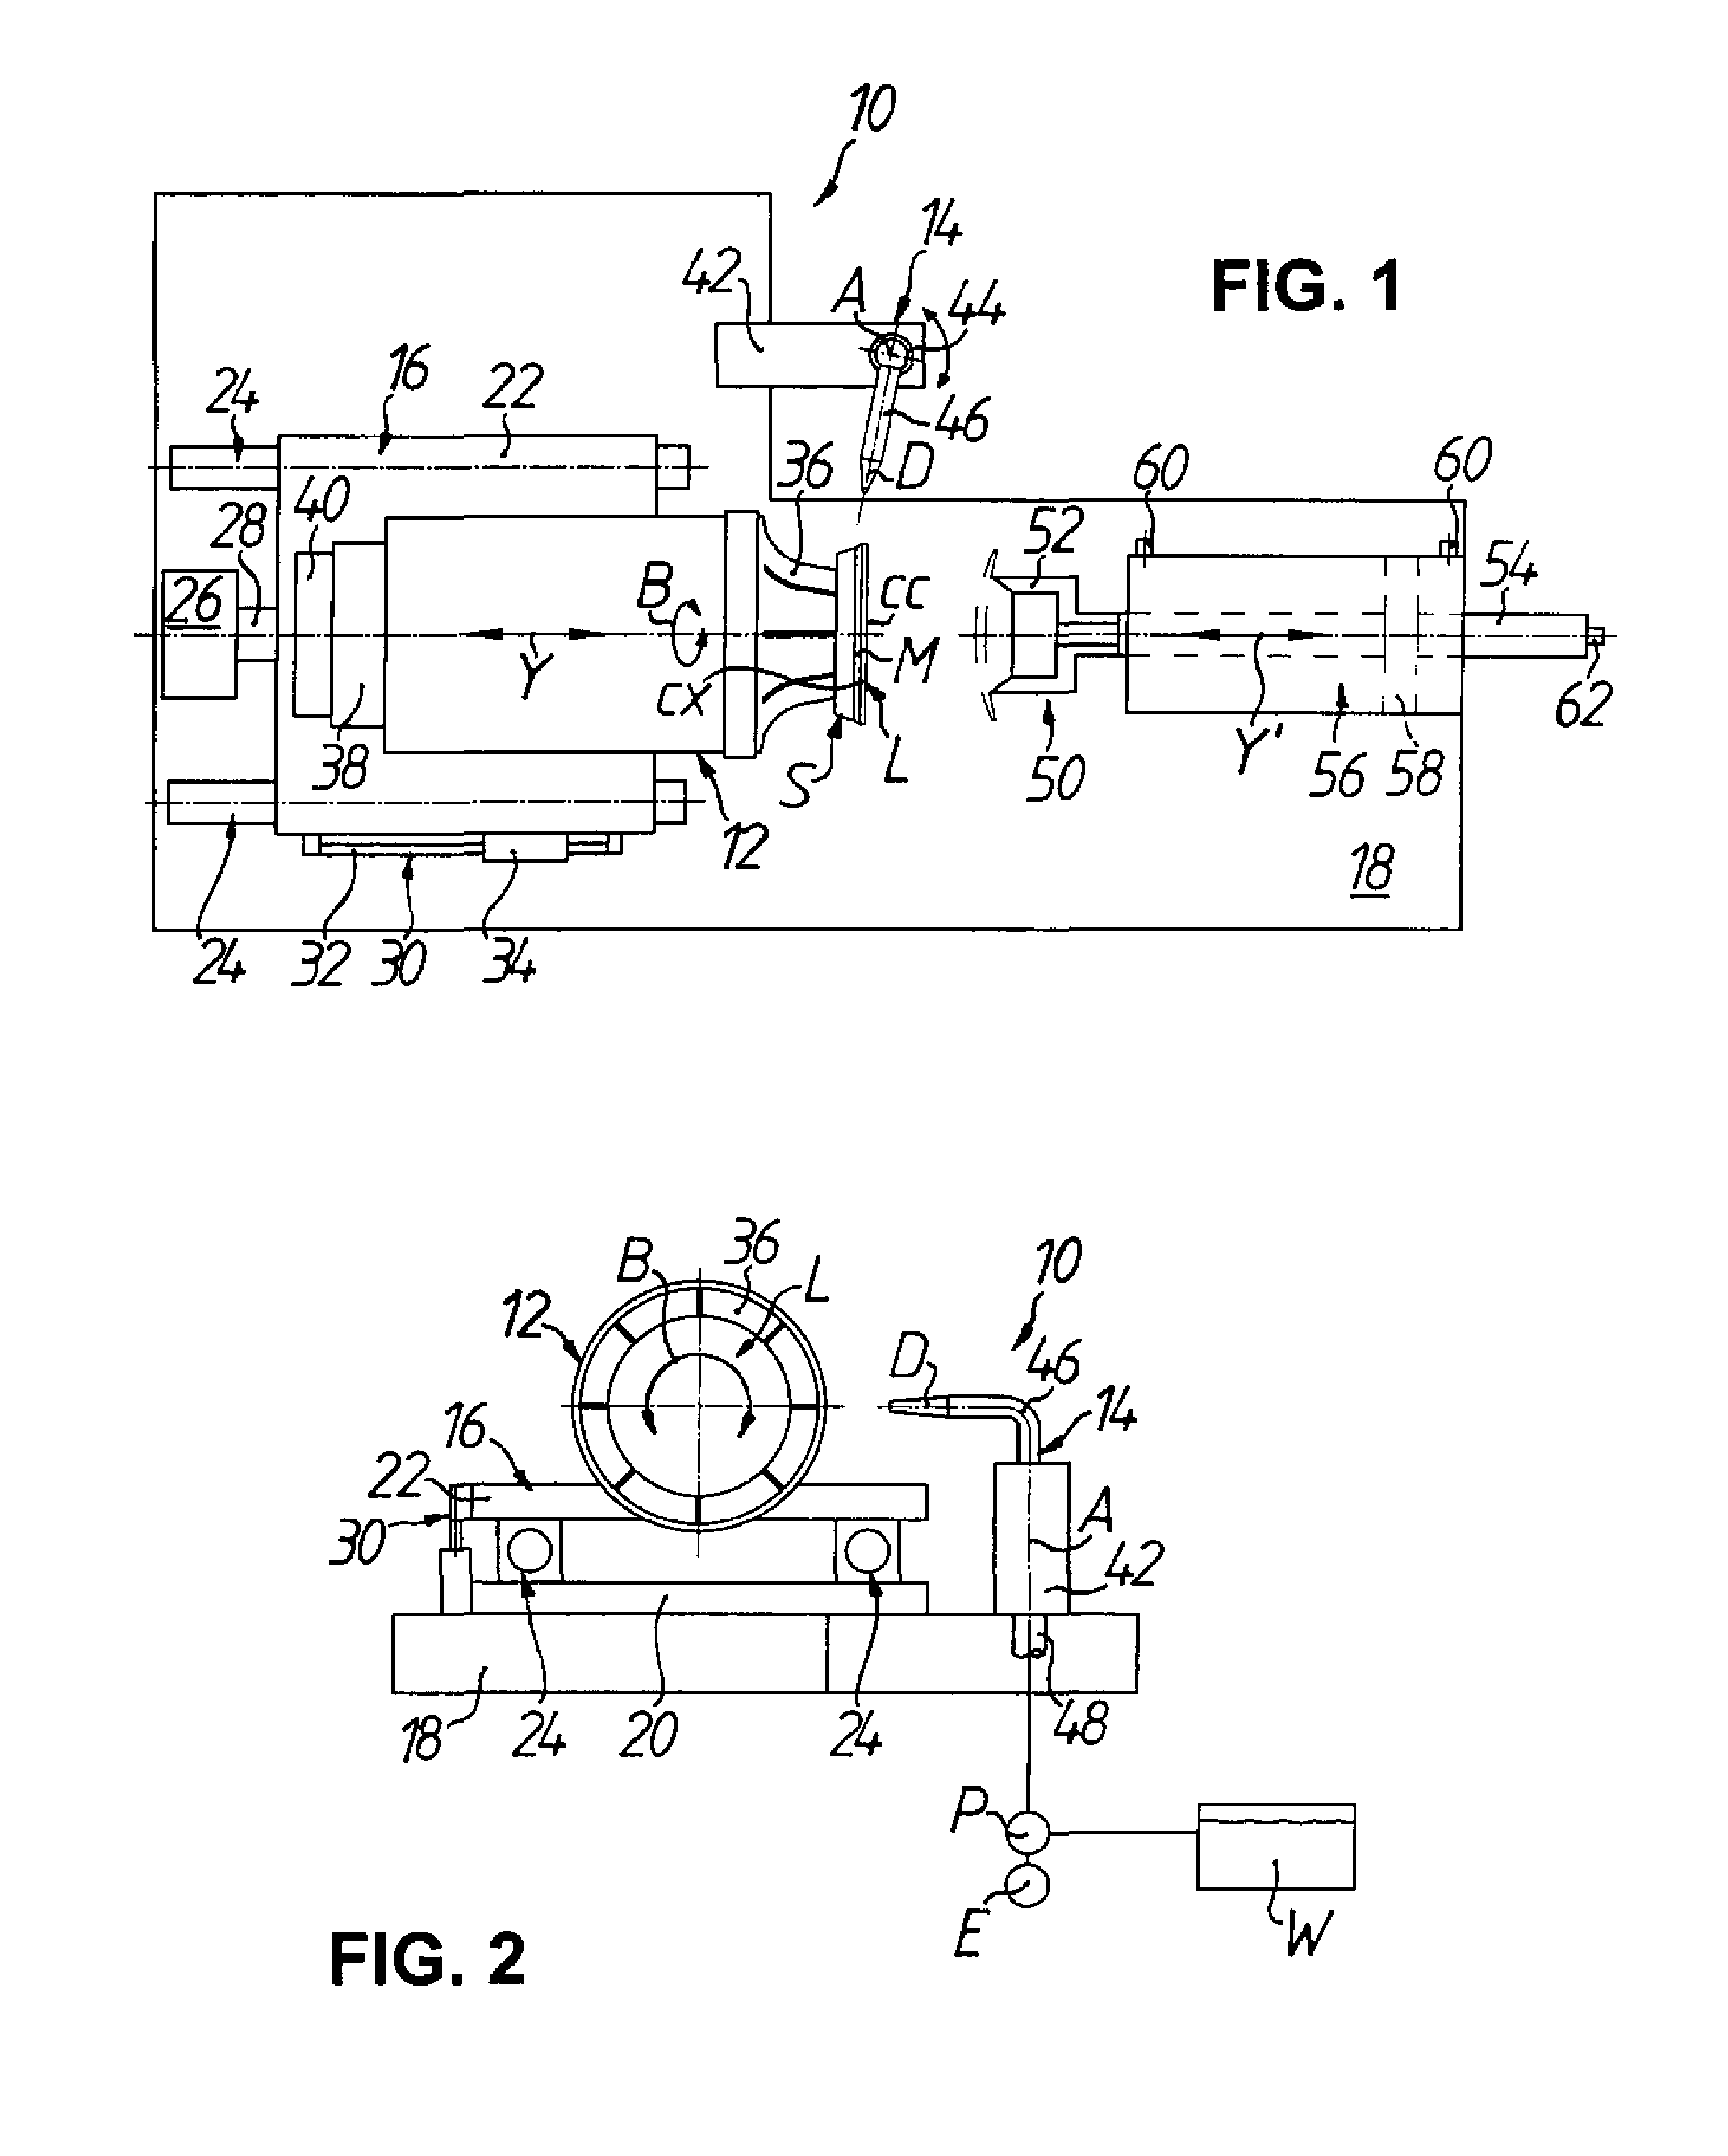 Device and method for deblocking optical workpieces, in particular spectacle lenses